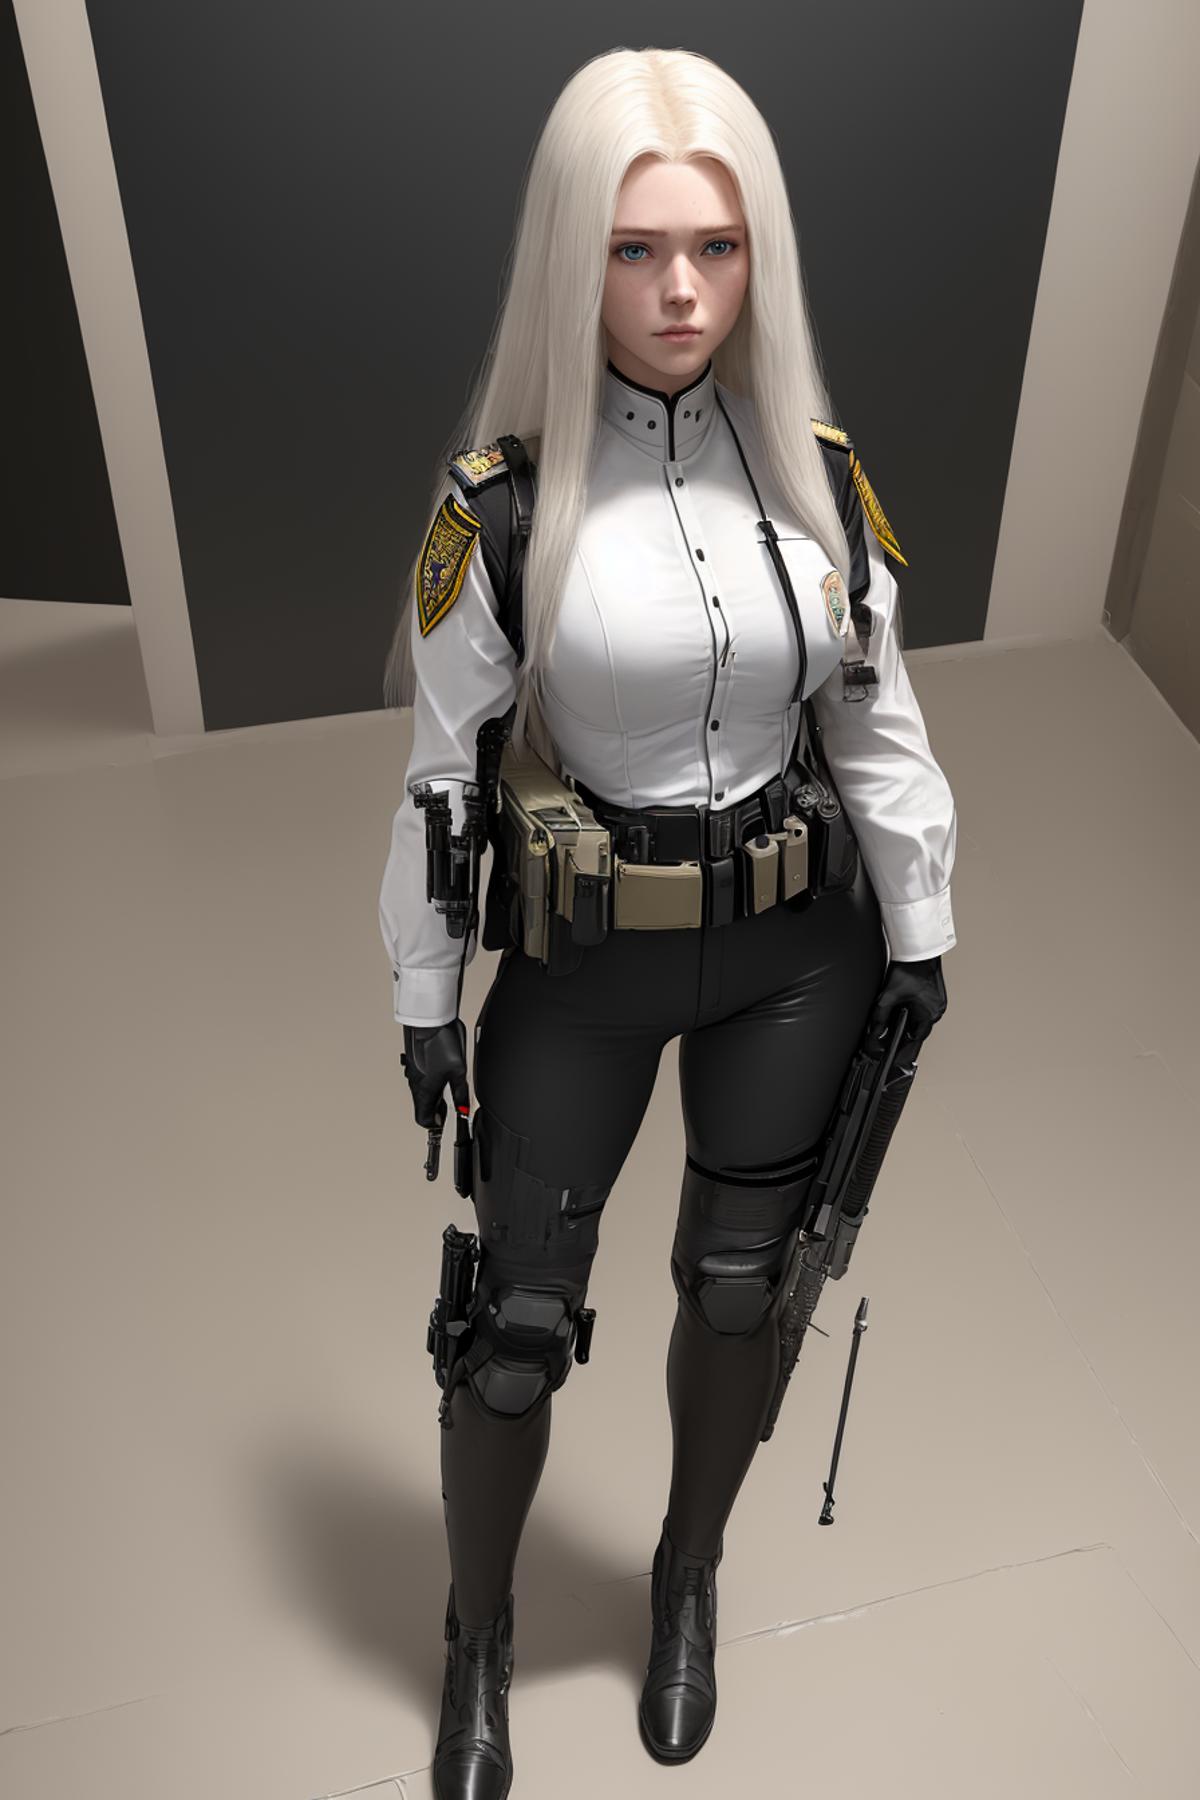 AI model image by test157t668